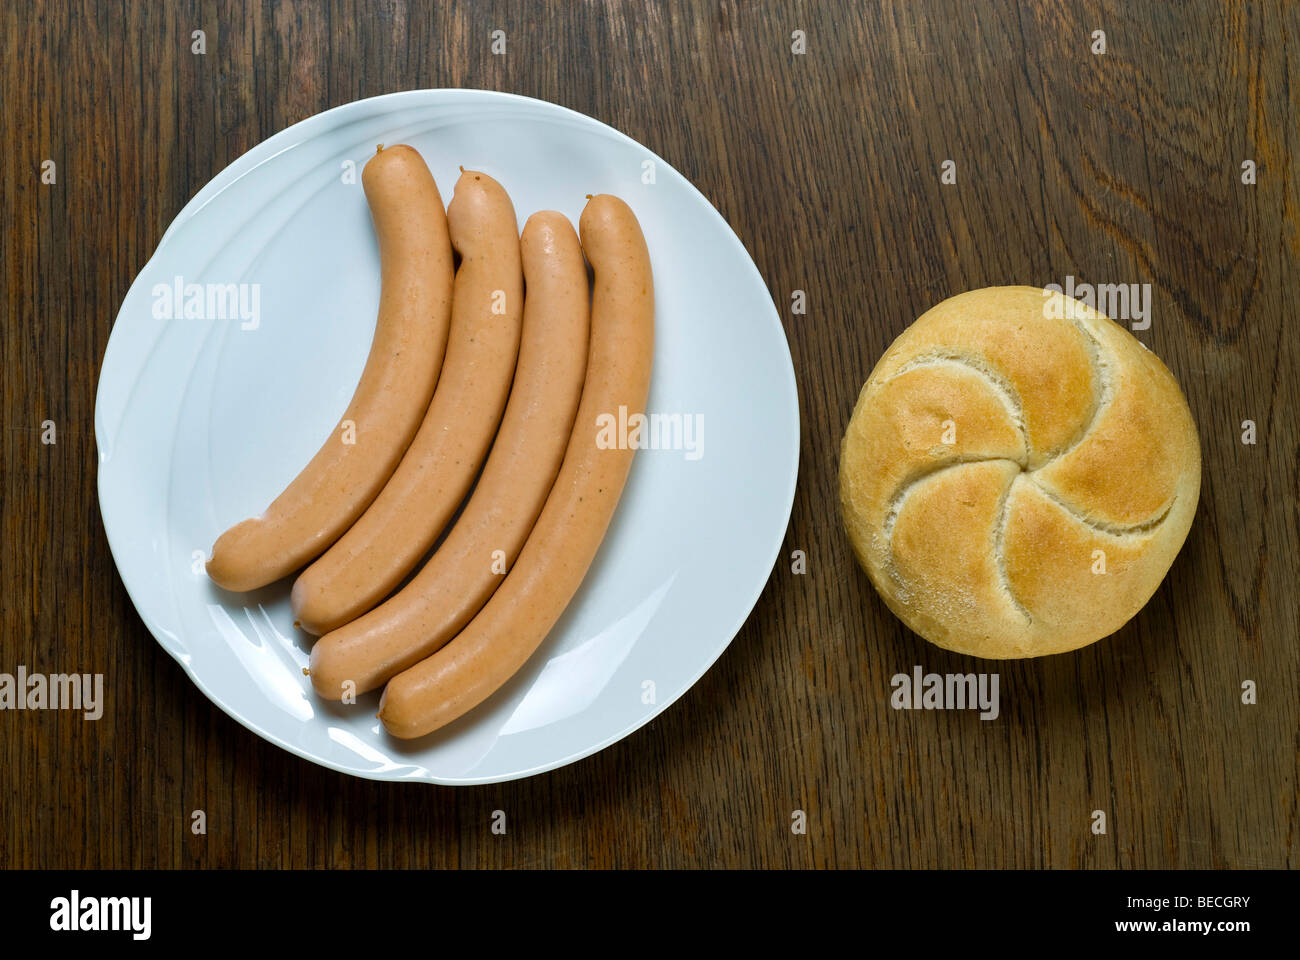 Wiener sausages with Semmel roll Stock Photo